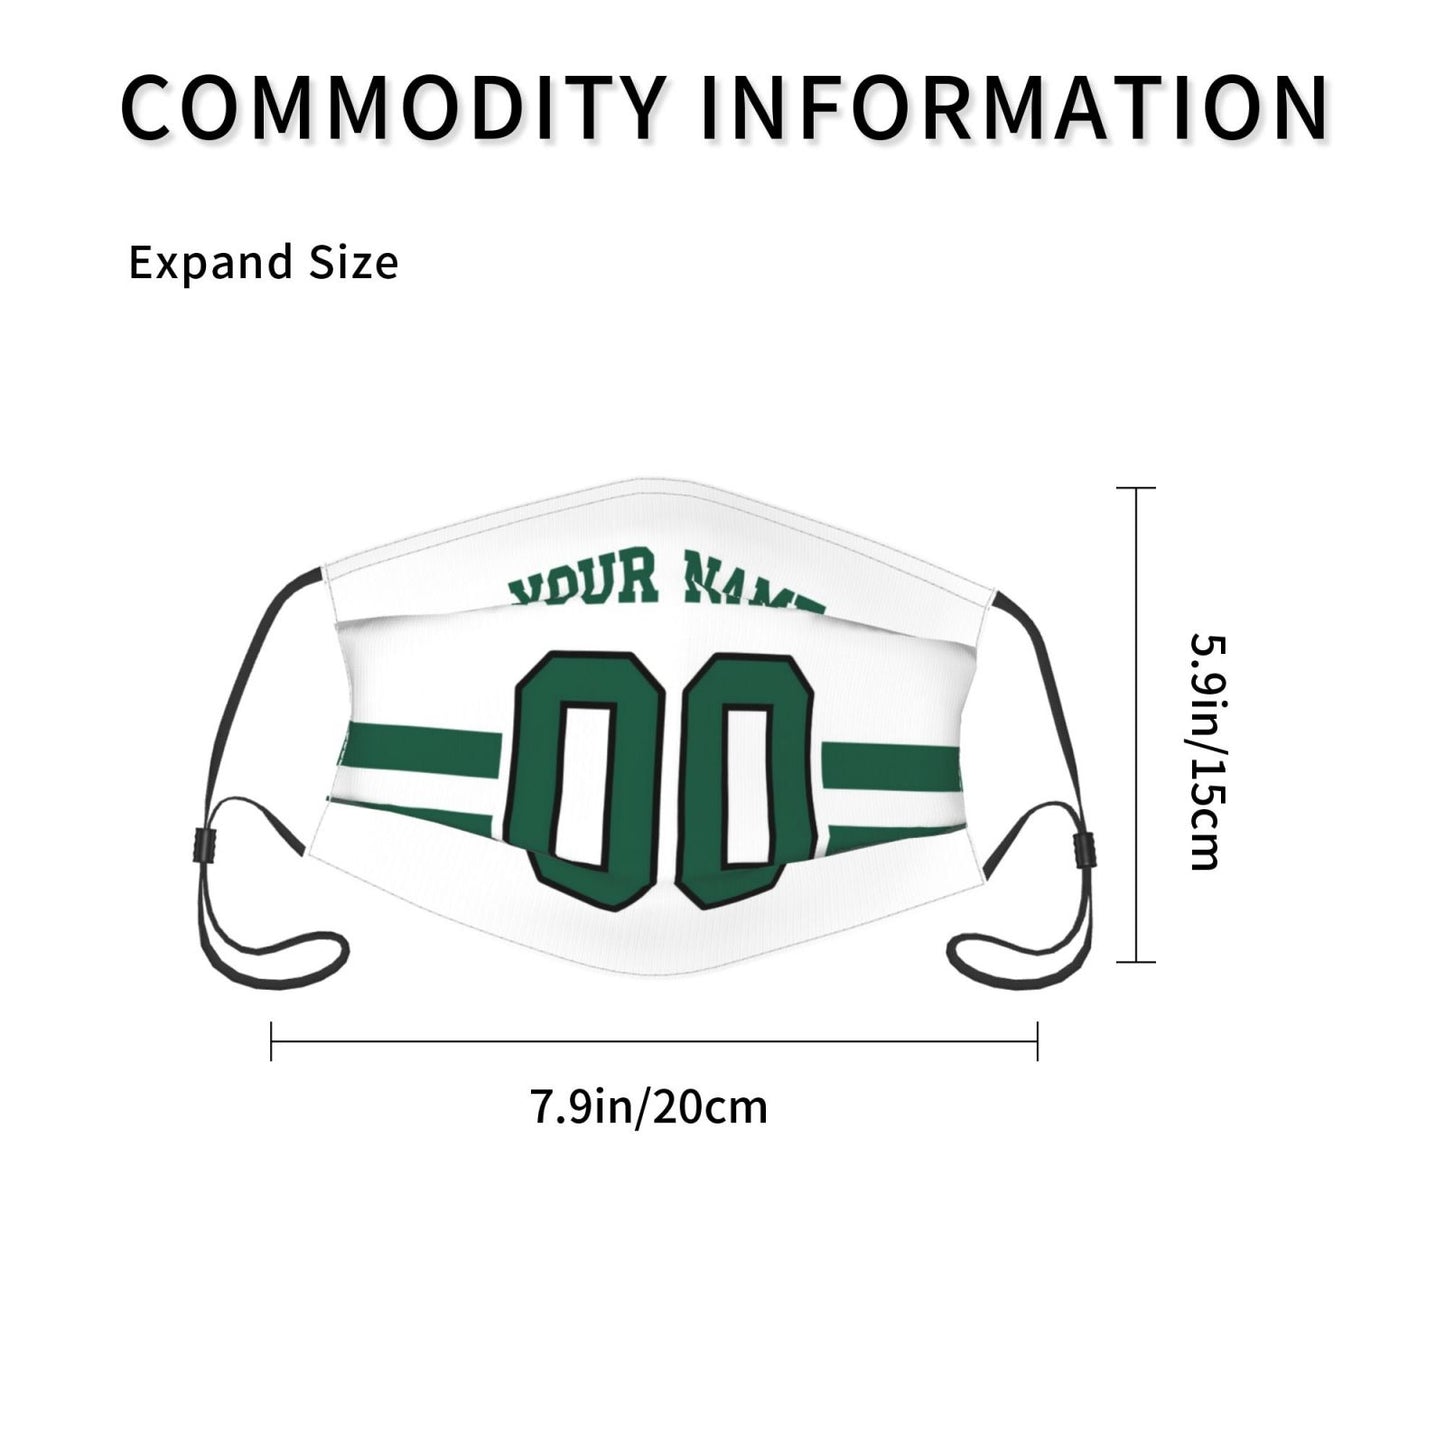 2-Pack New York Jets Face Covering Football Team Decorative Adult Face Mask With Filters PM 2.5 White